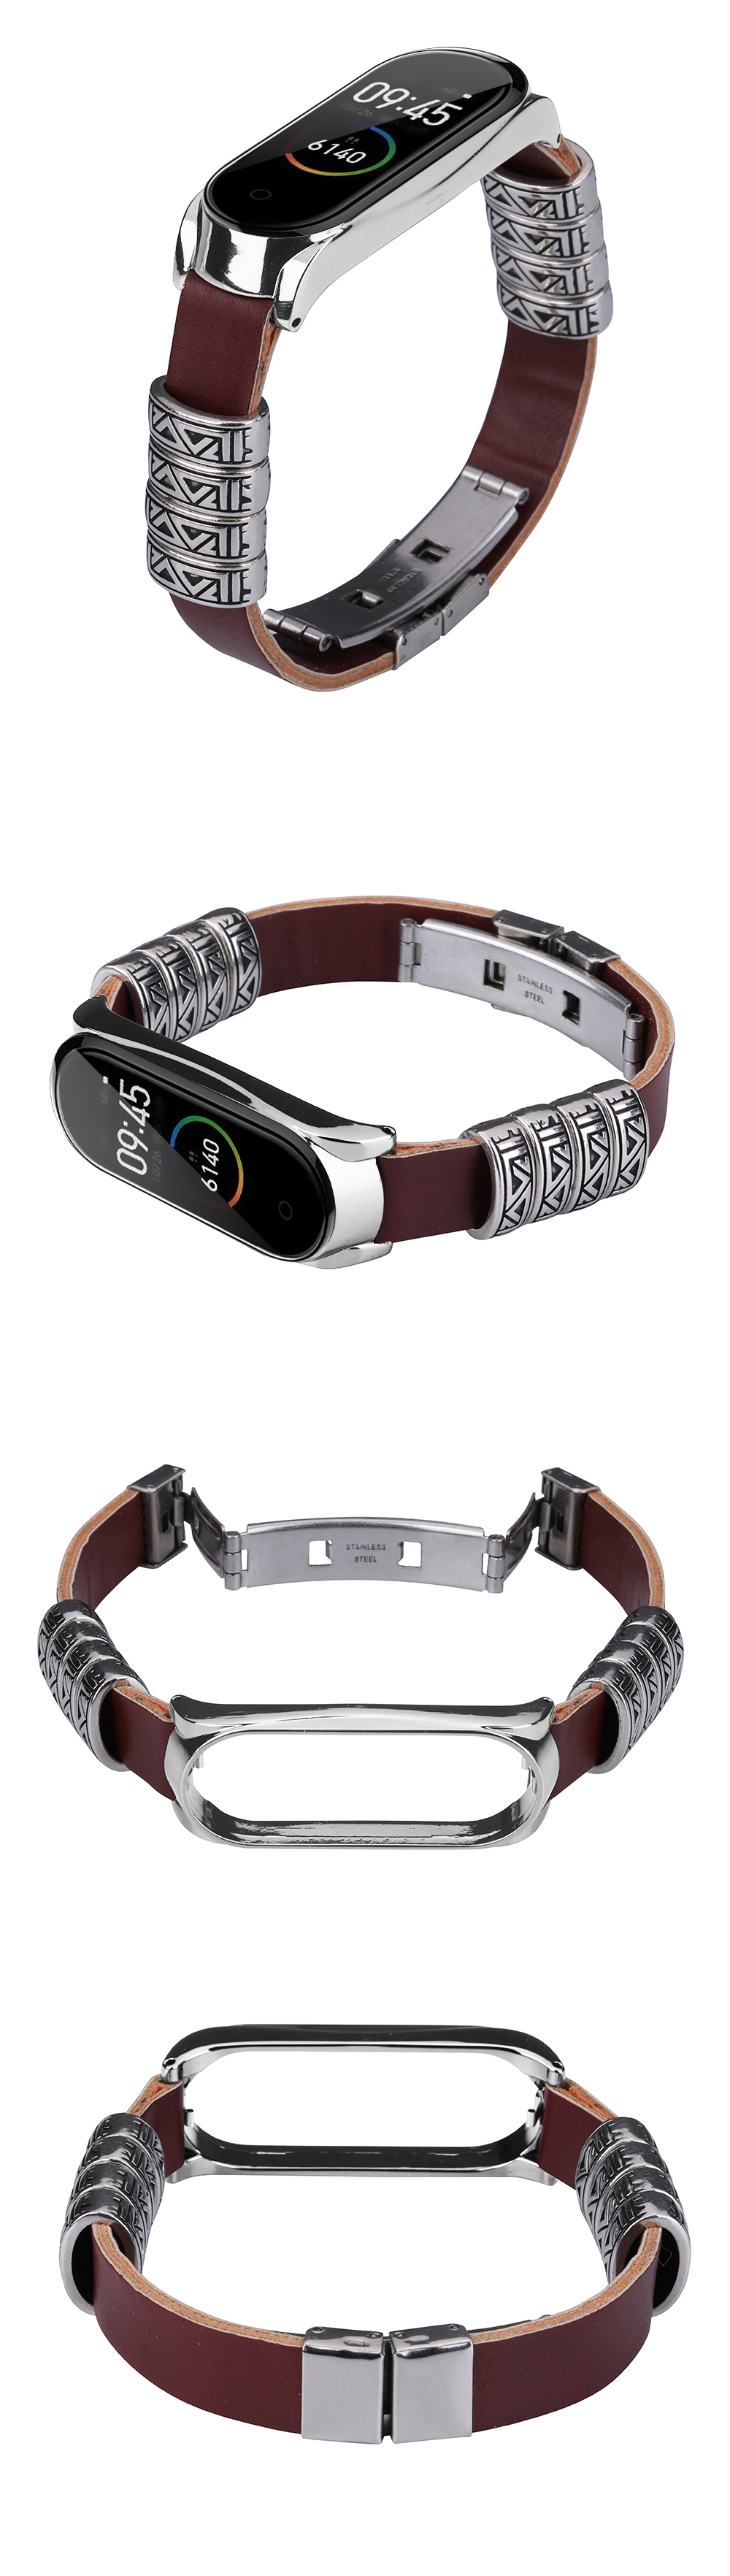 Bakeey-Retro-Butterfly-Push-Button-Deployment-Buckle-Metal-Watch-Band-Strap-Replacement-for-Xiaomi-M-1614264-5